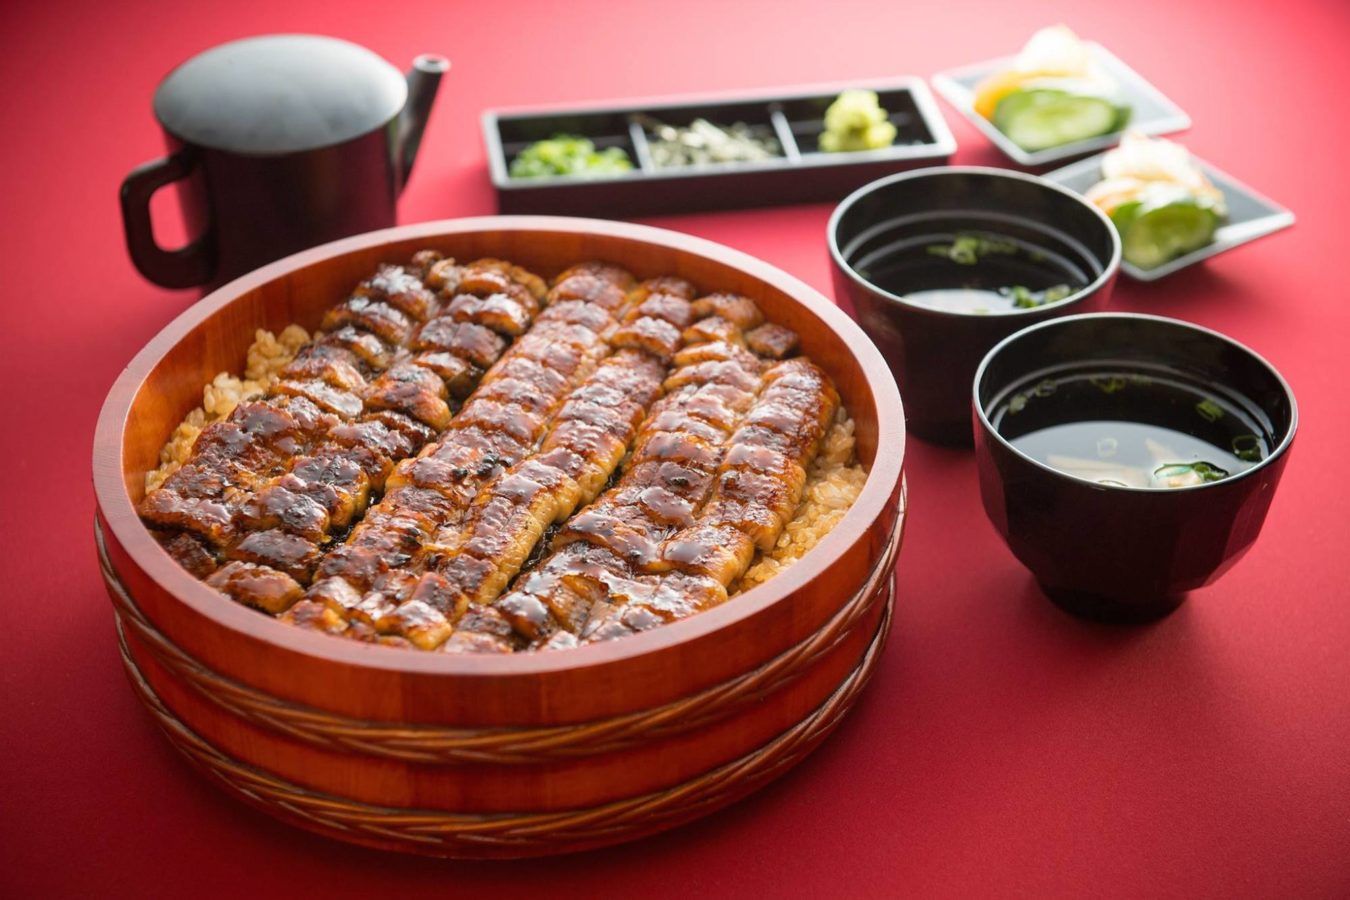 The gourmand’s guide to unagi and anago